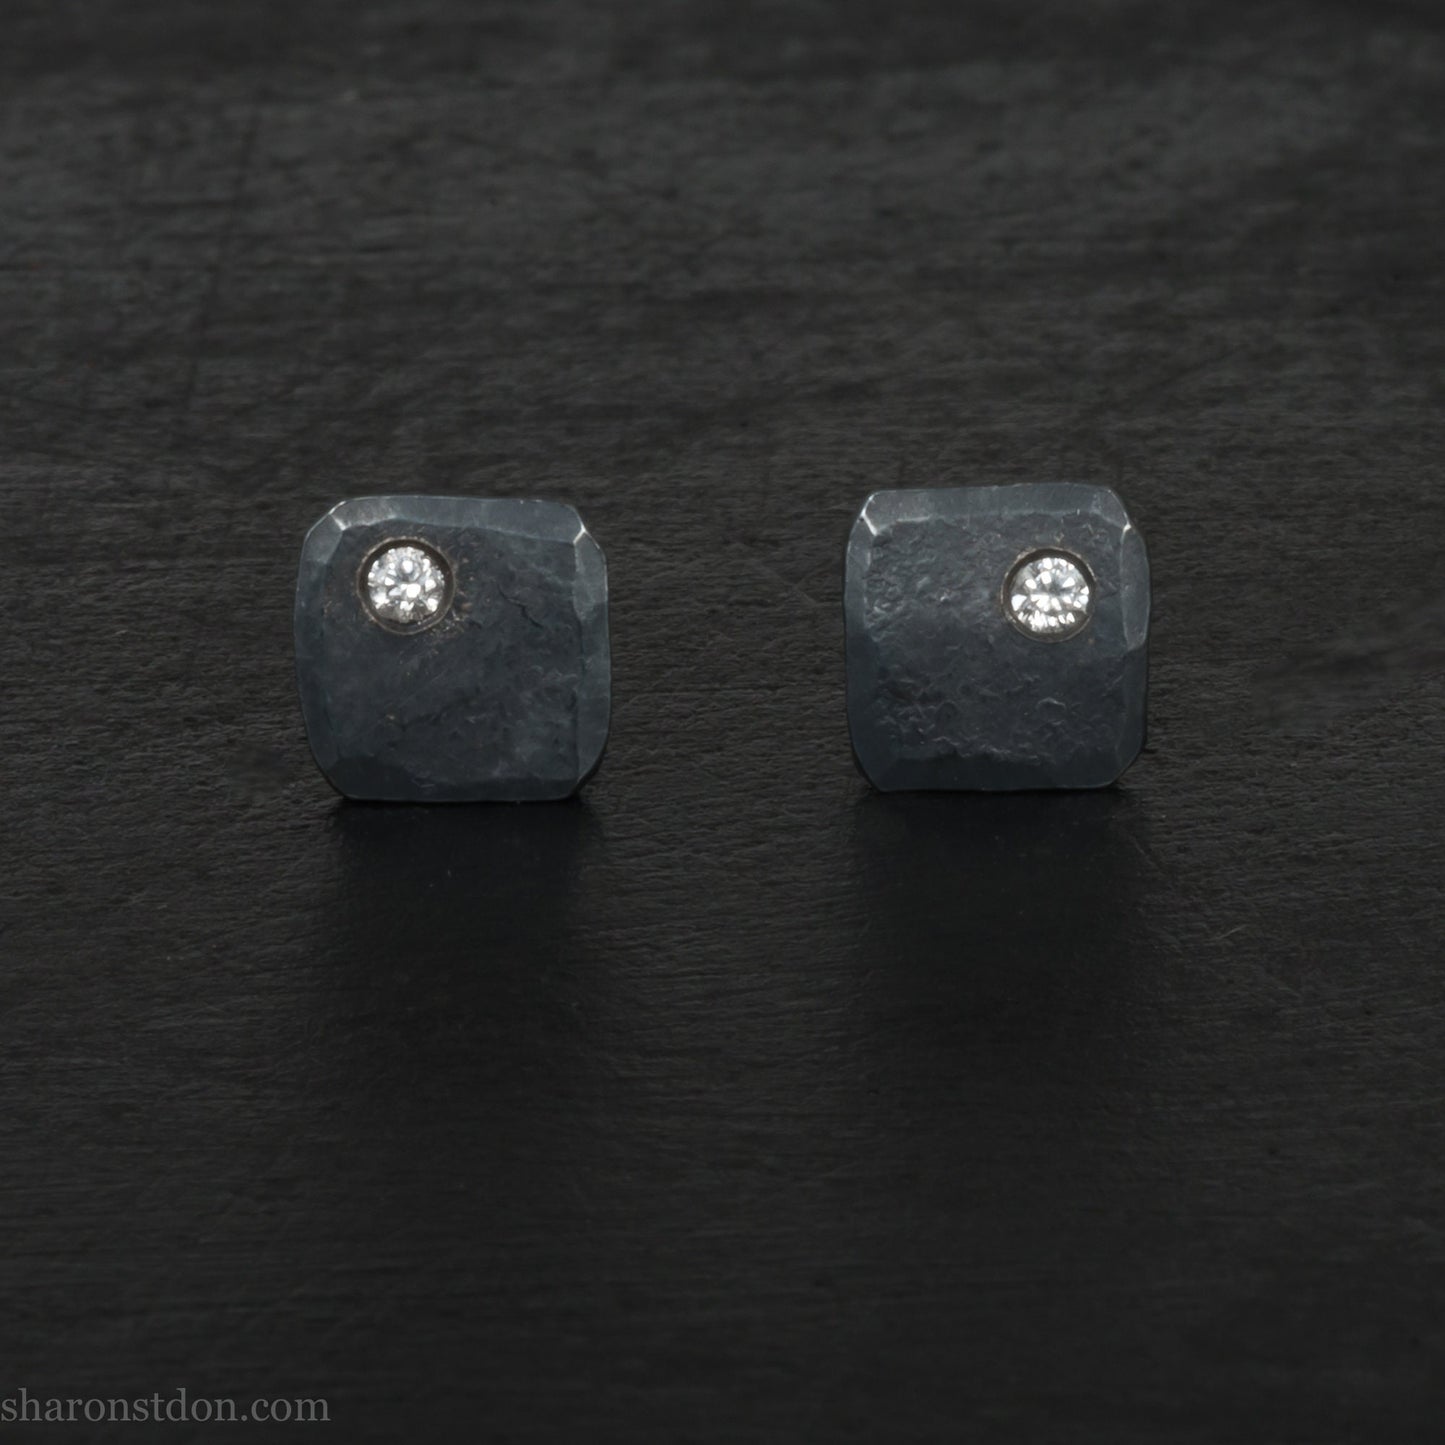 Handmade oxidized black 925 sterling silver stud earrings with cubic zirconia gemstone in the corner. Small 7mm x 7mm square stud earrings made by Sharon SaintDon in North America.